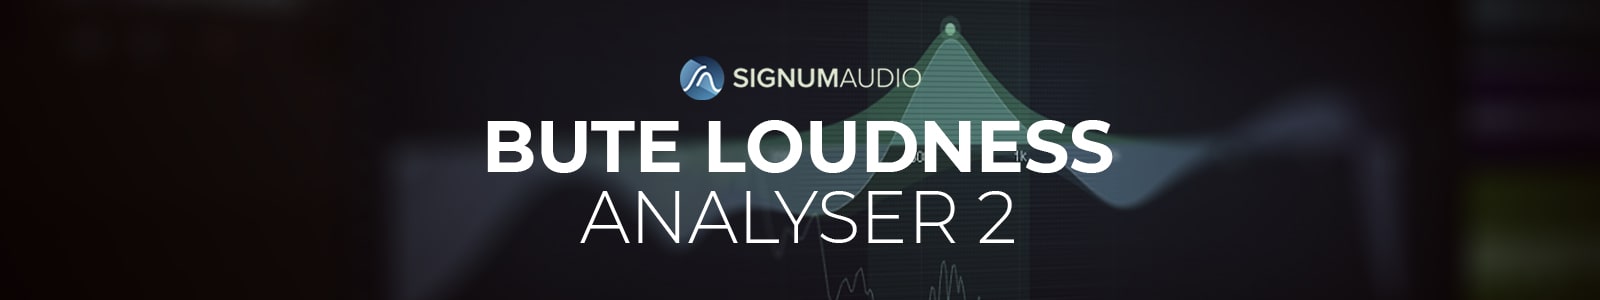 Signum Audio BUTE Loudness Analyser 2 Stereo